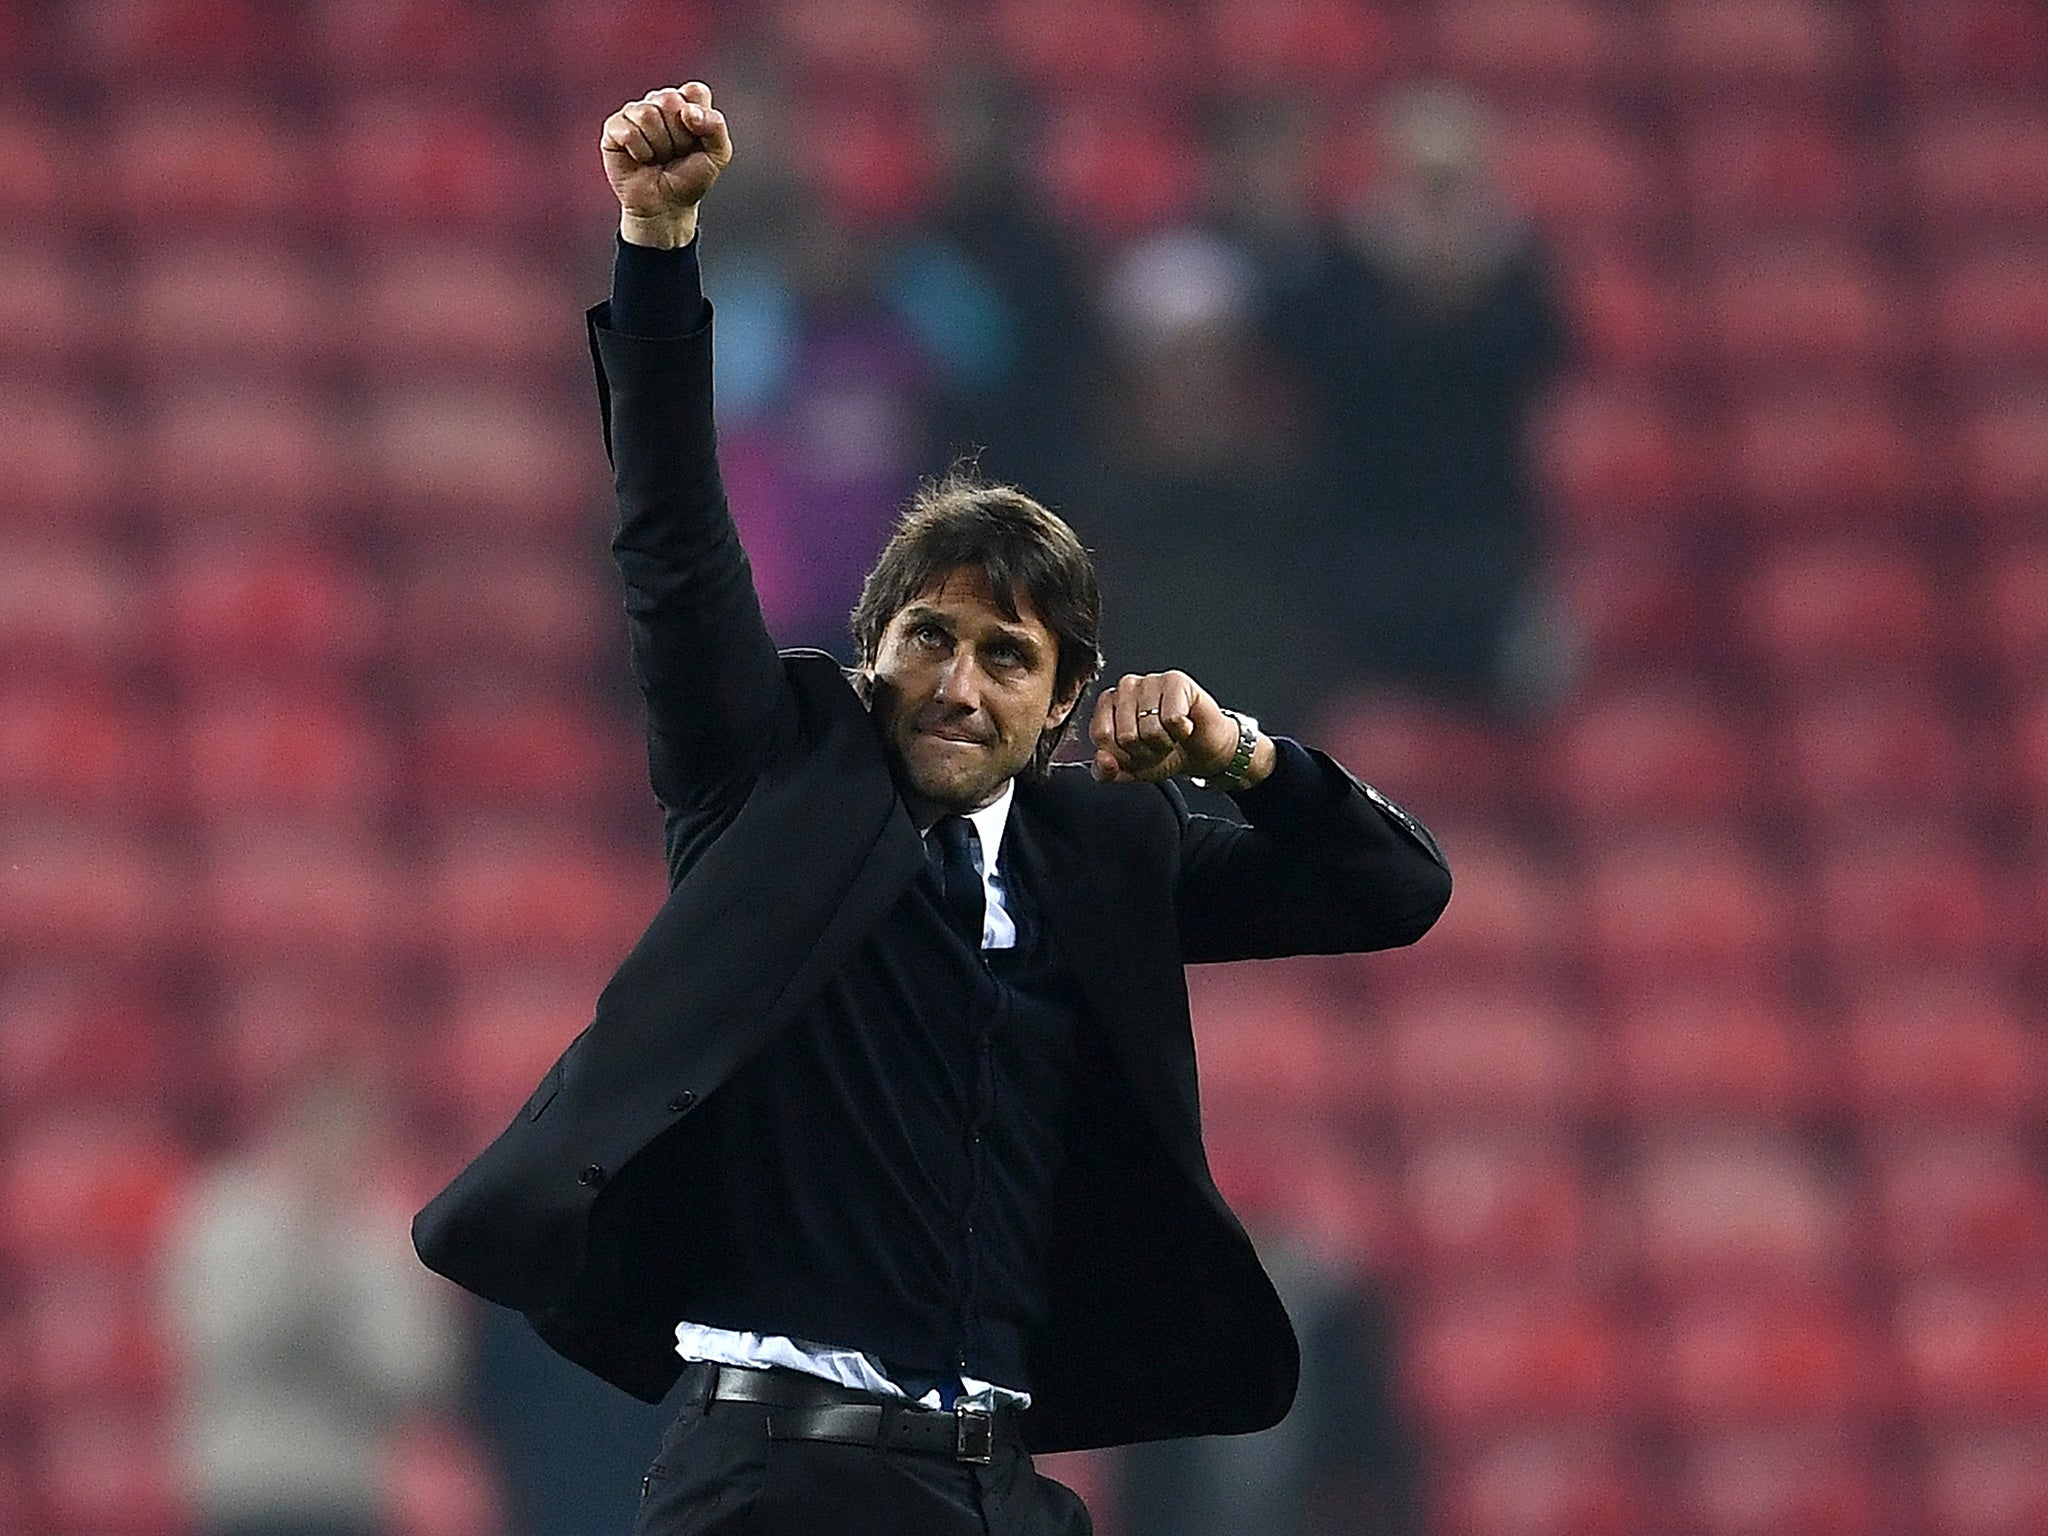 Conte lavishes praise on Chelsea players after tenth straight win